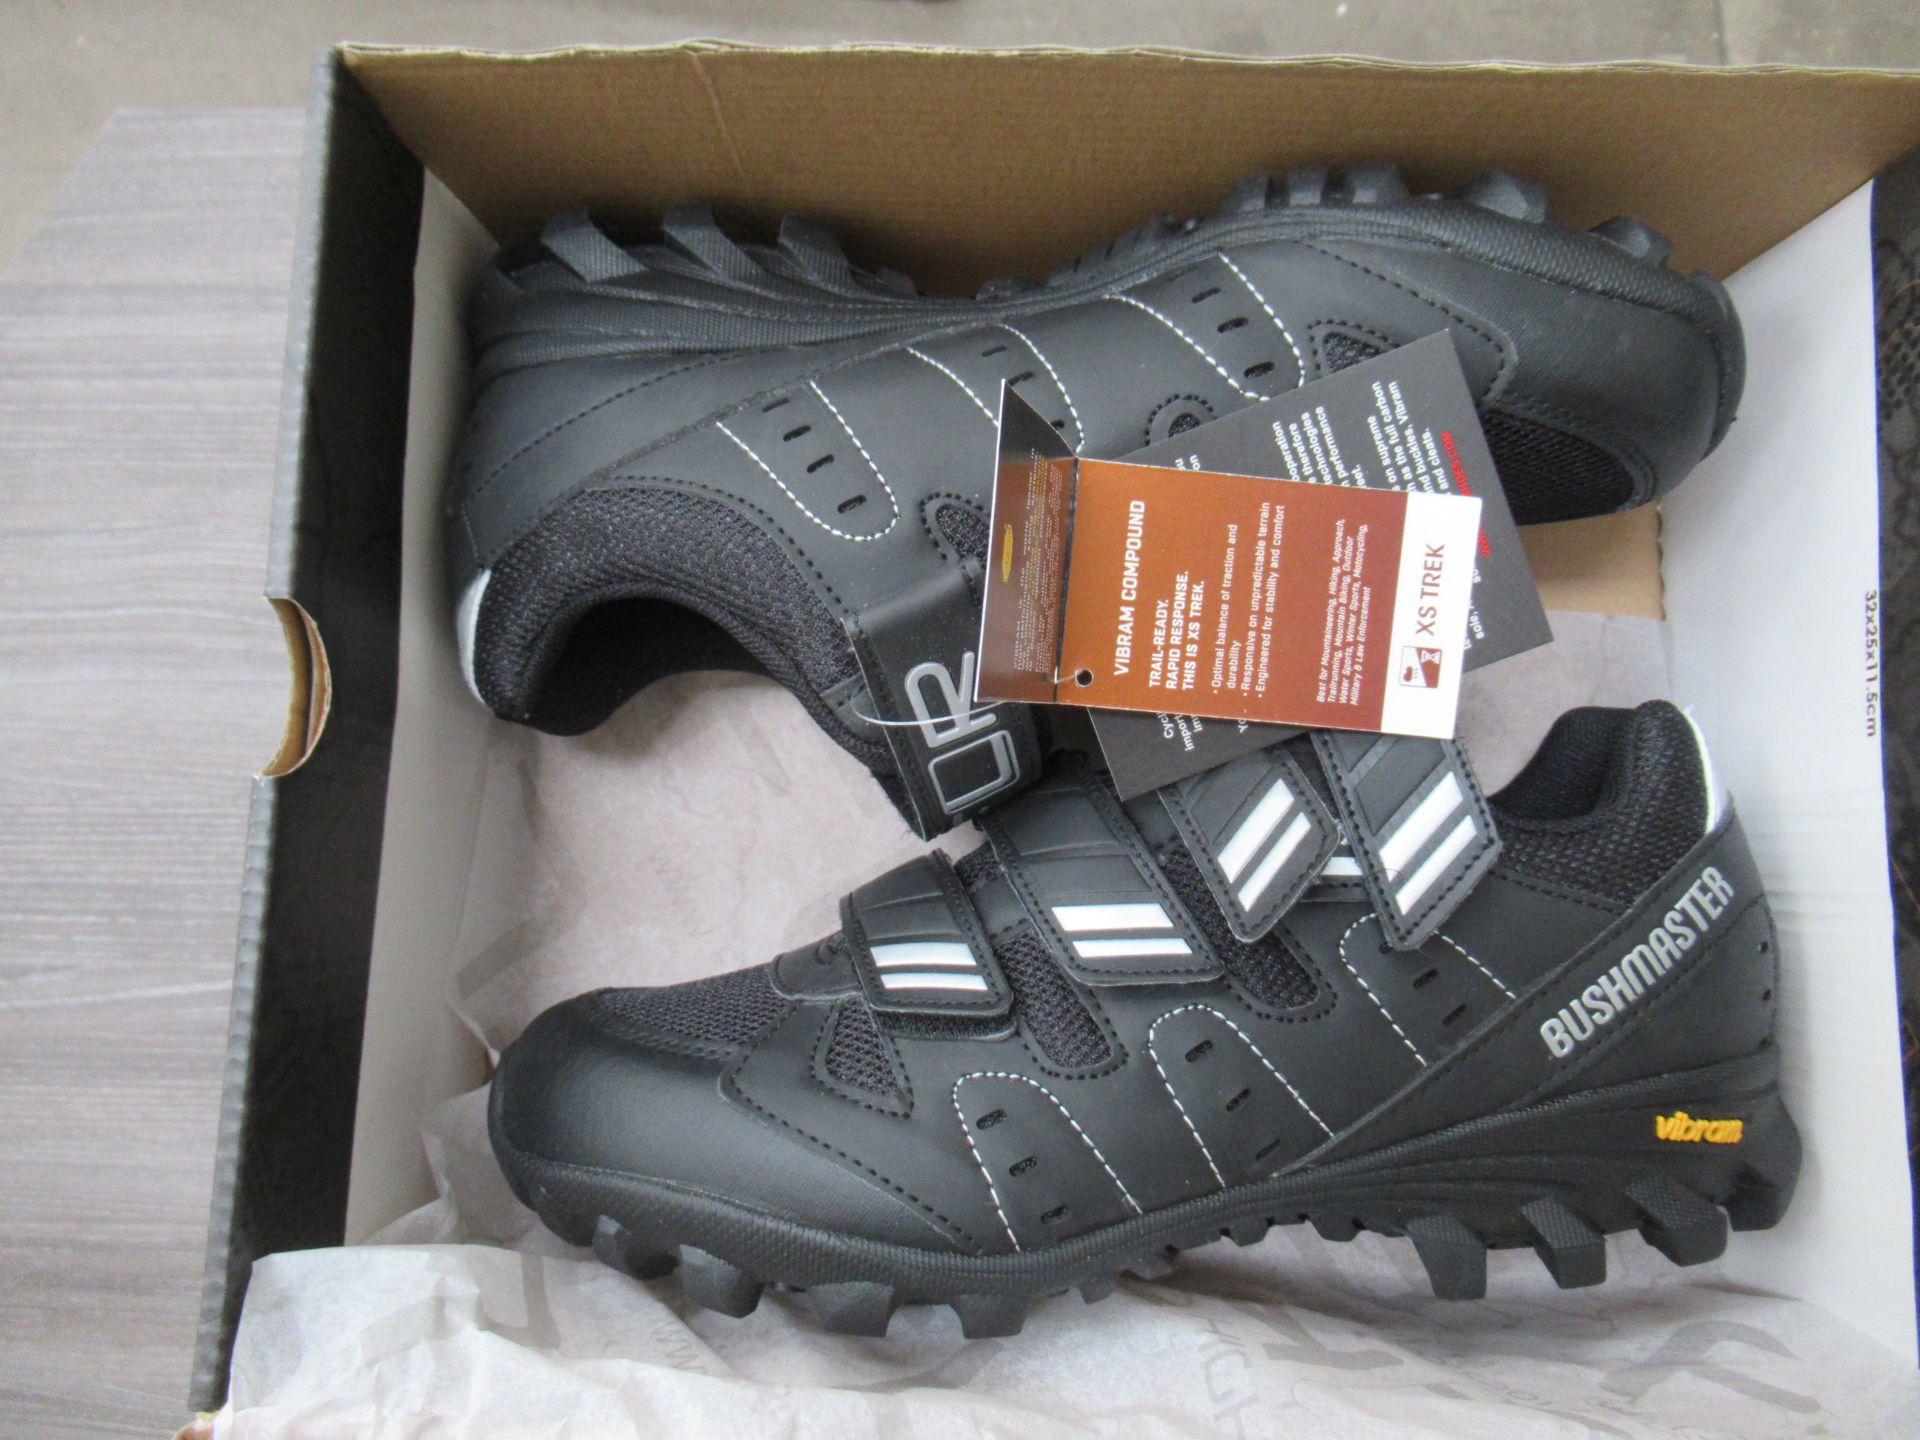 3 x Pairs of FLR cycling shoes - 1 x Bushmaster boxed EU size 41 (RRP£79.99); 1 x F-11 boxed EU size - Image 3 of 10